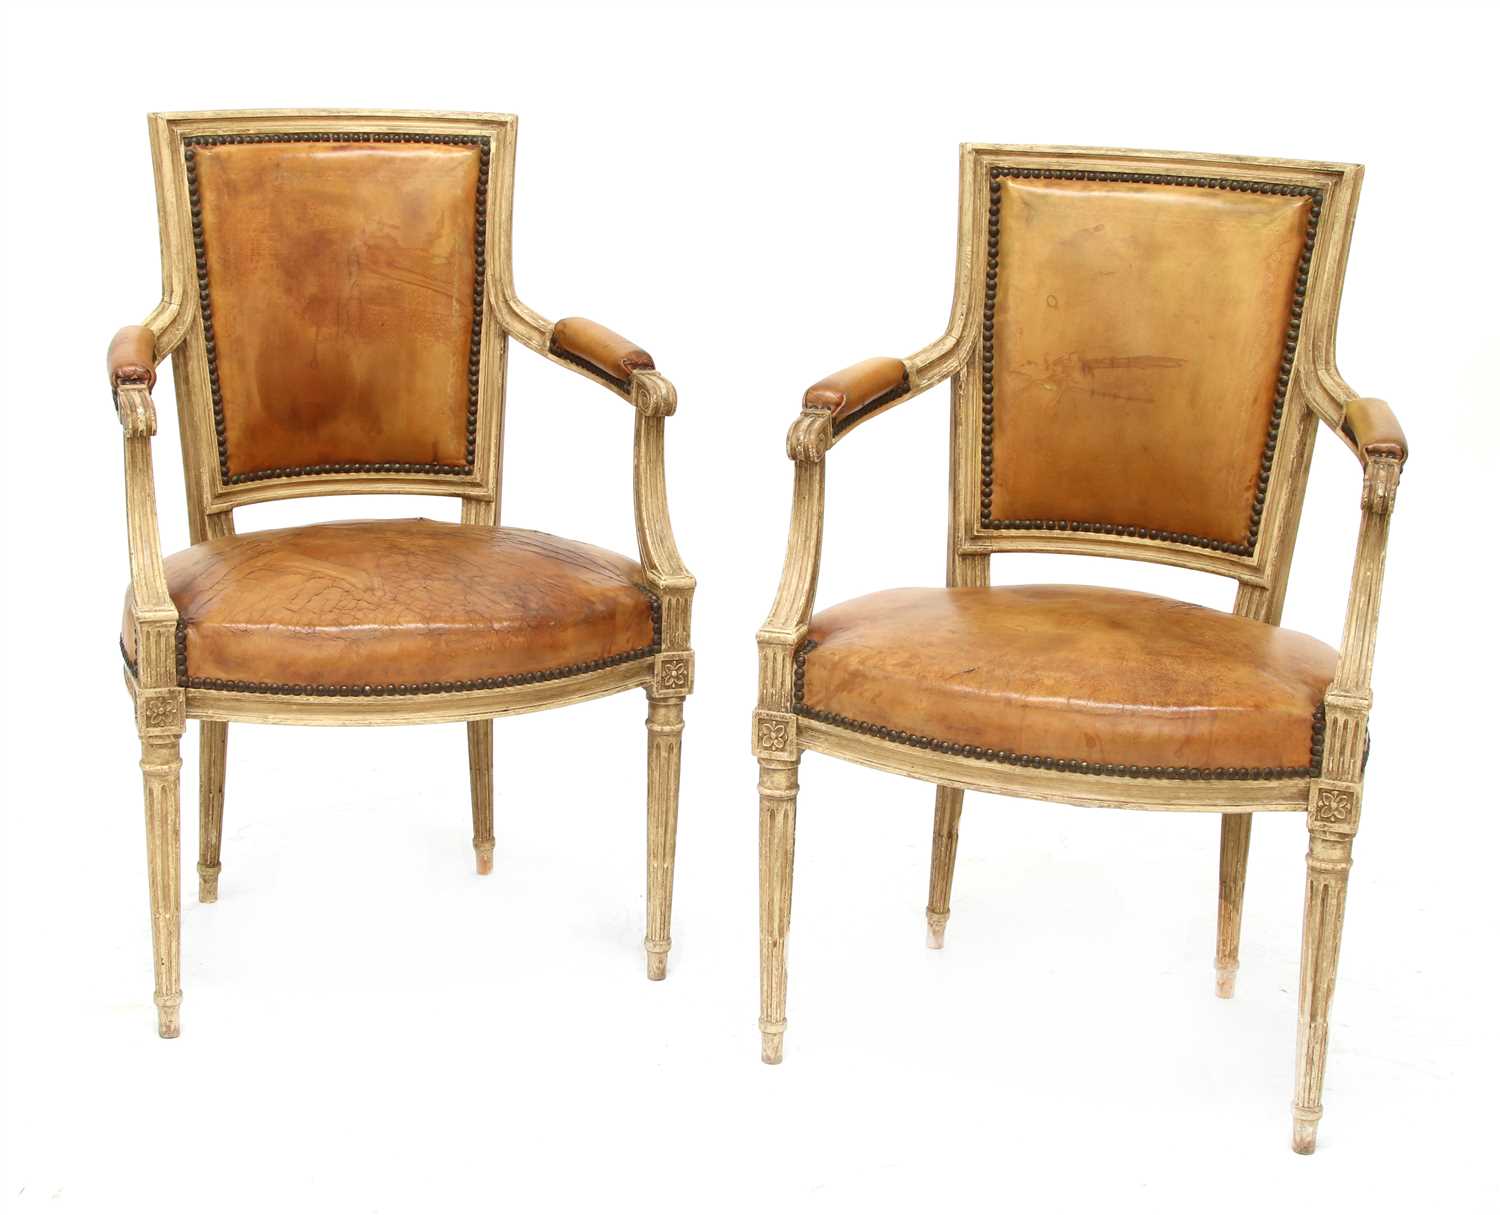 Lot 38 - A pair of Louis XVI-style elbow chairs